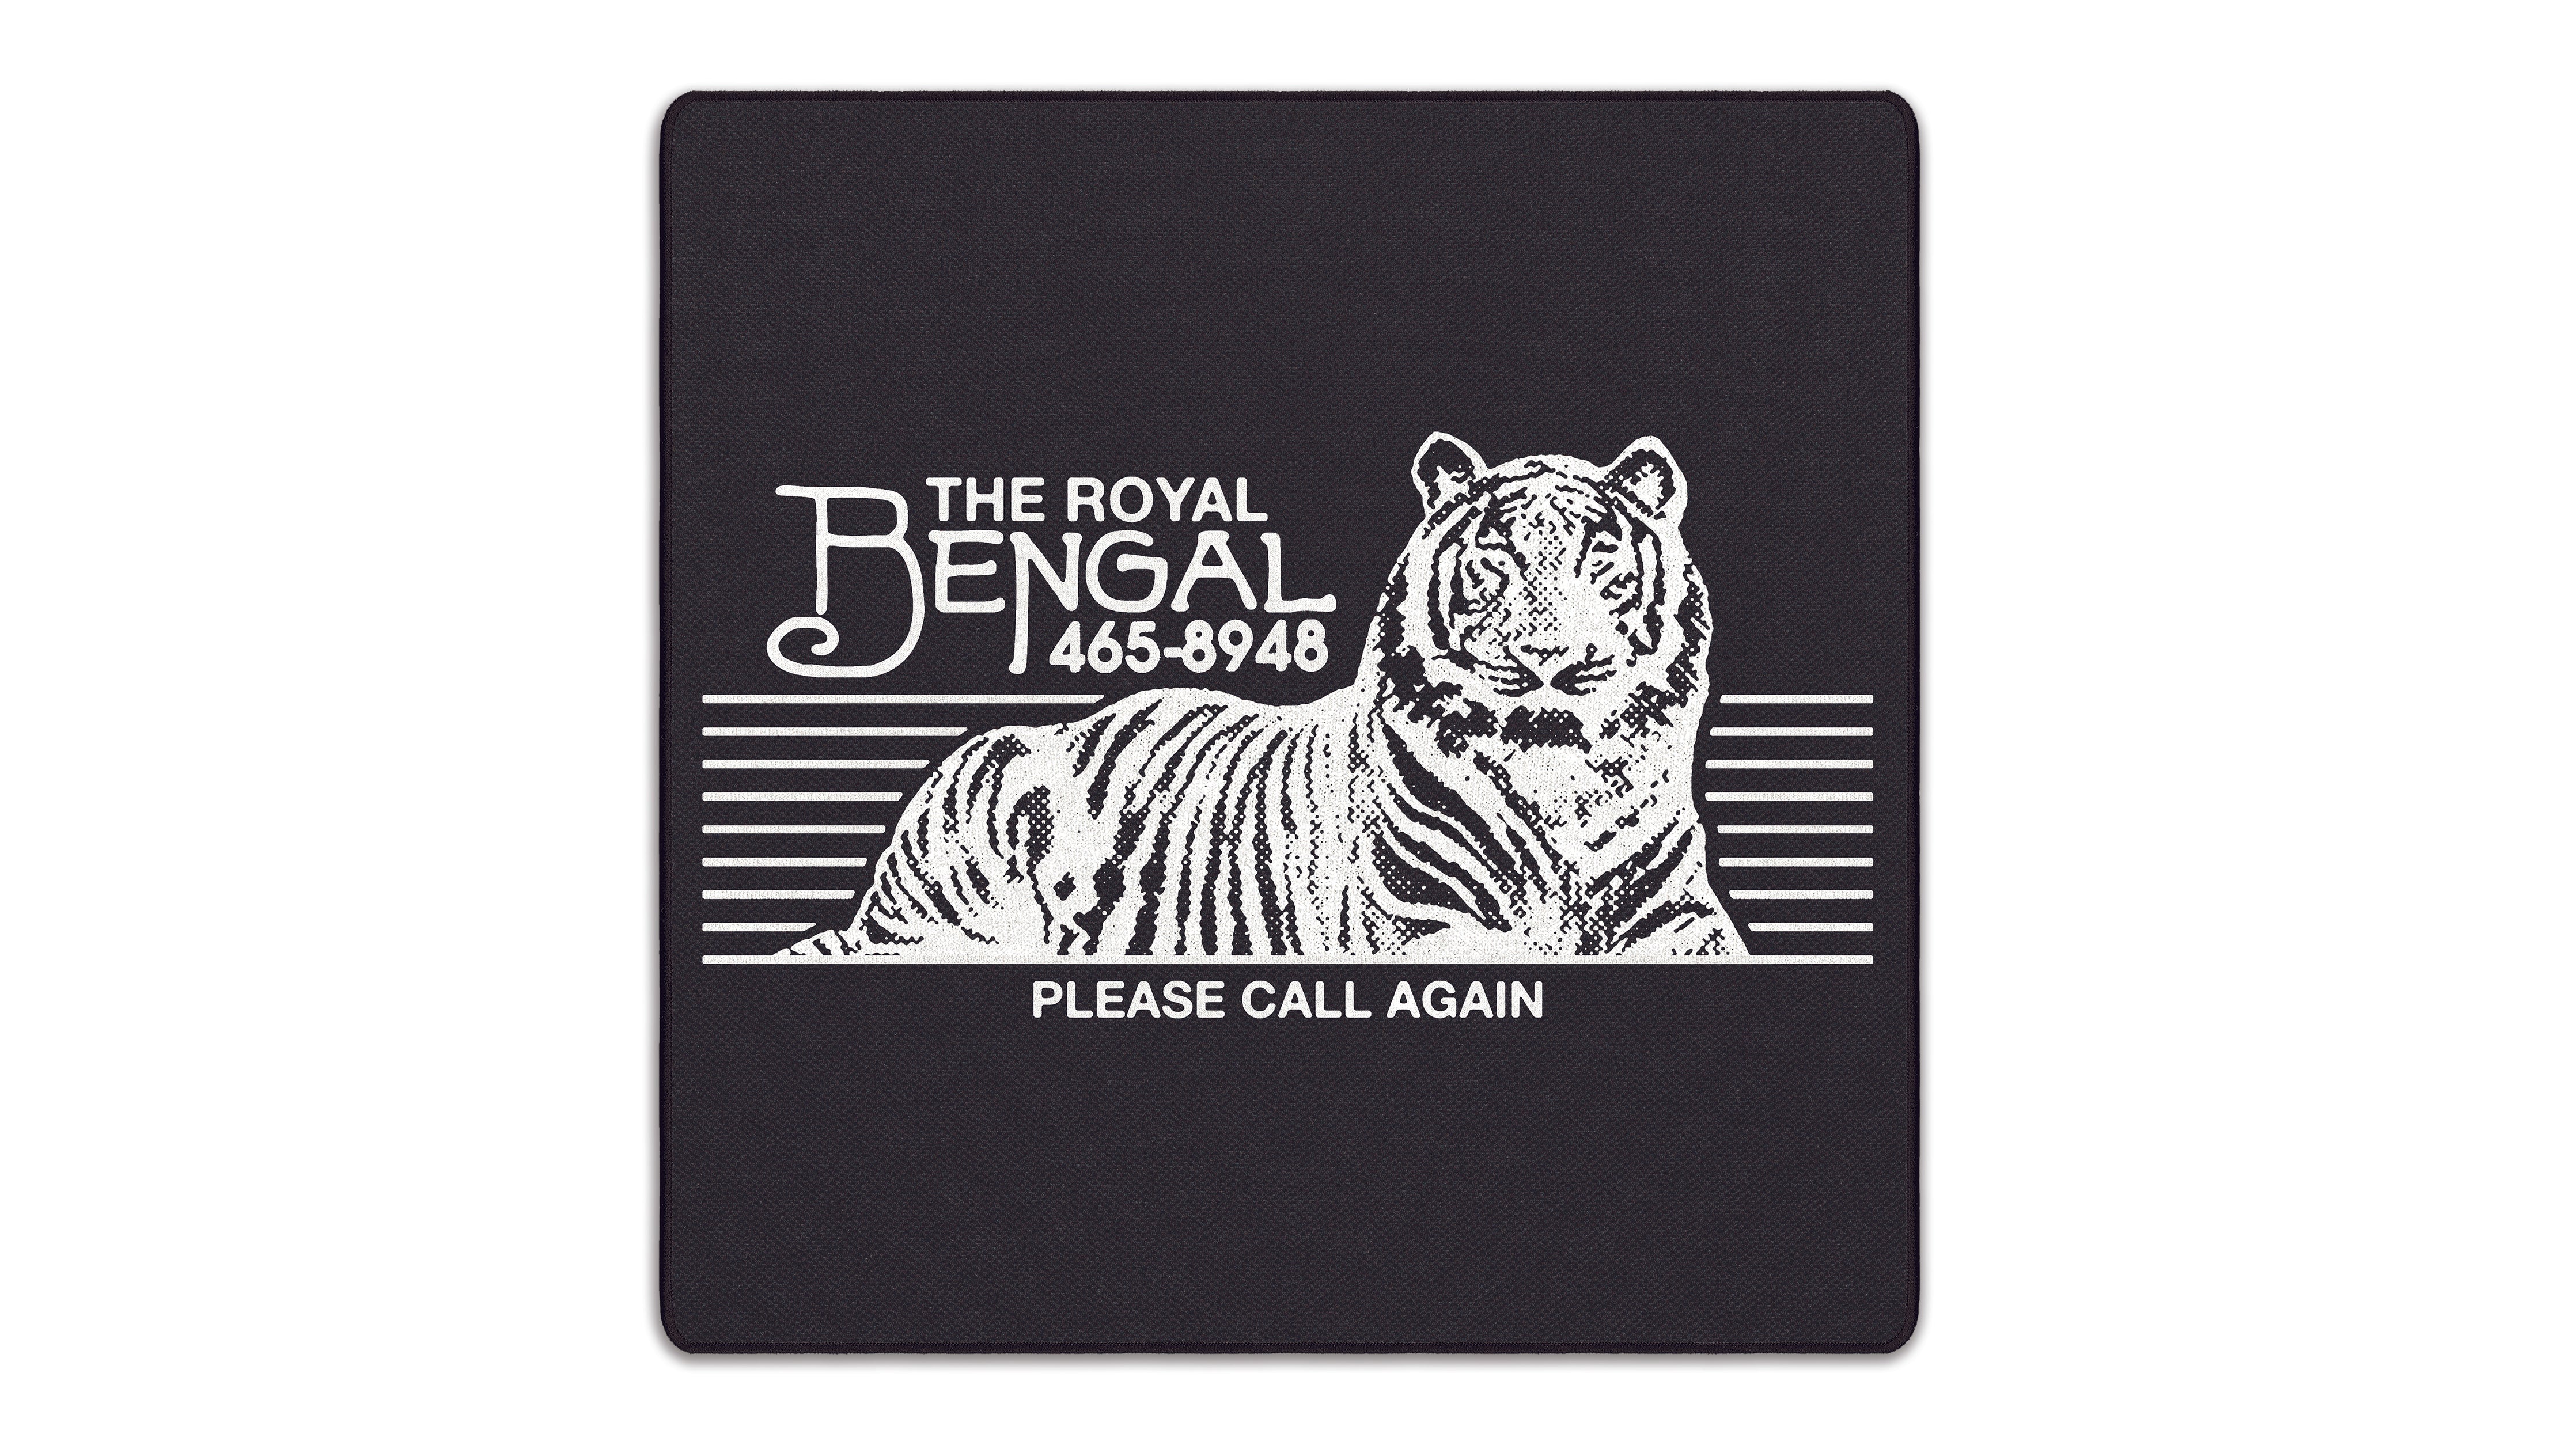 The Royal Bengal by OZGMX - The Mousepad Company